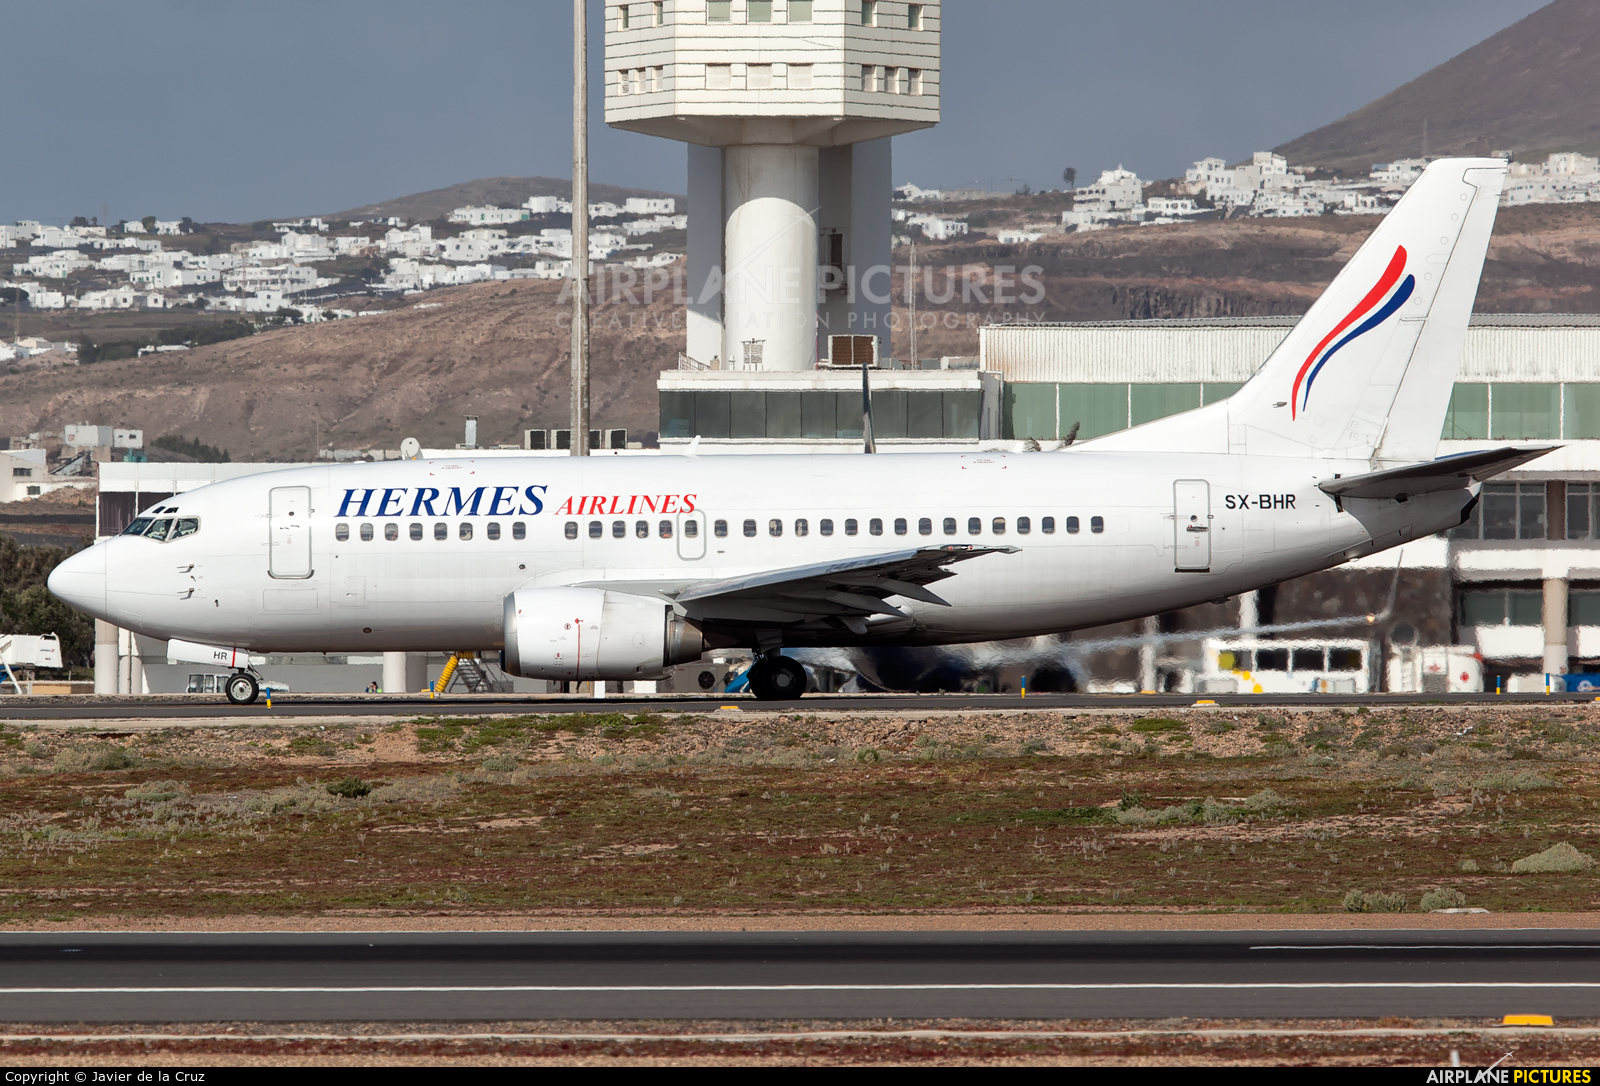 Hermes Airlines SX-BHR aircraft at Lanzarote - Arrecife